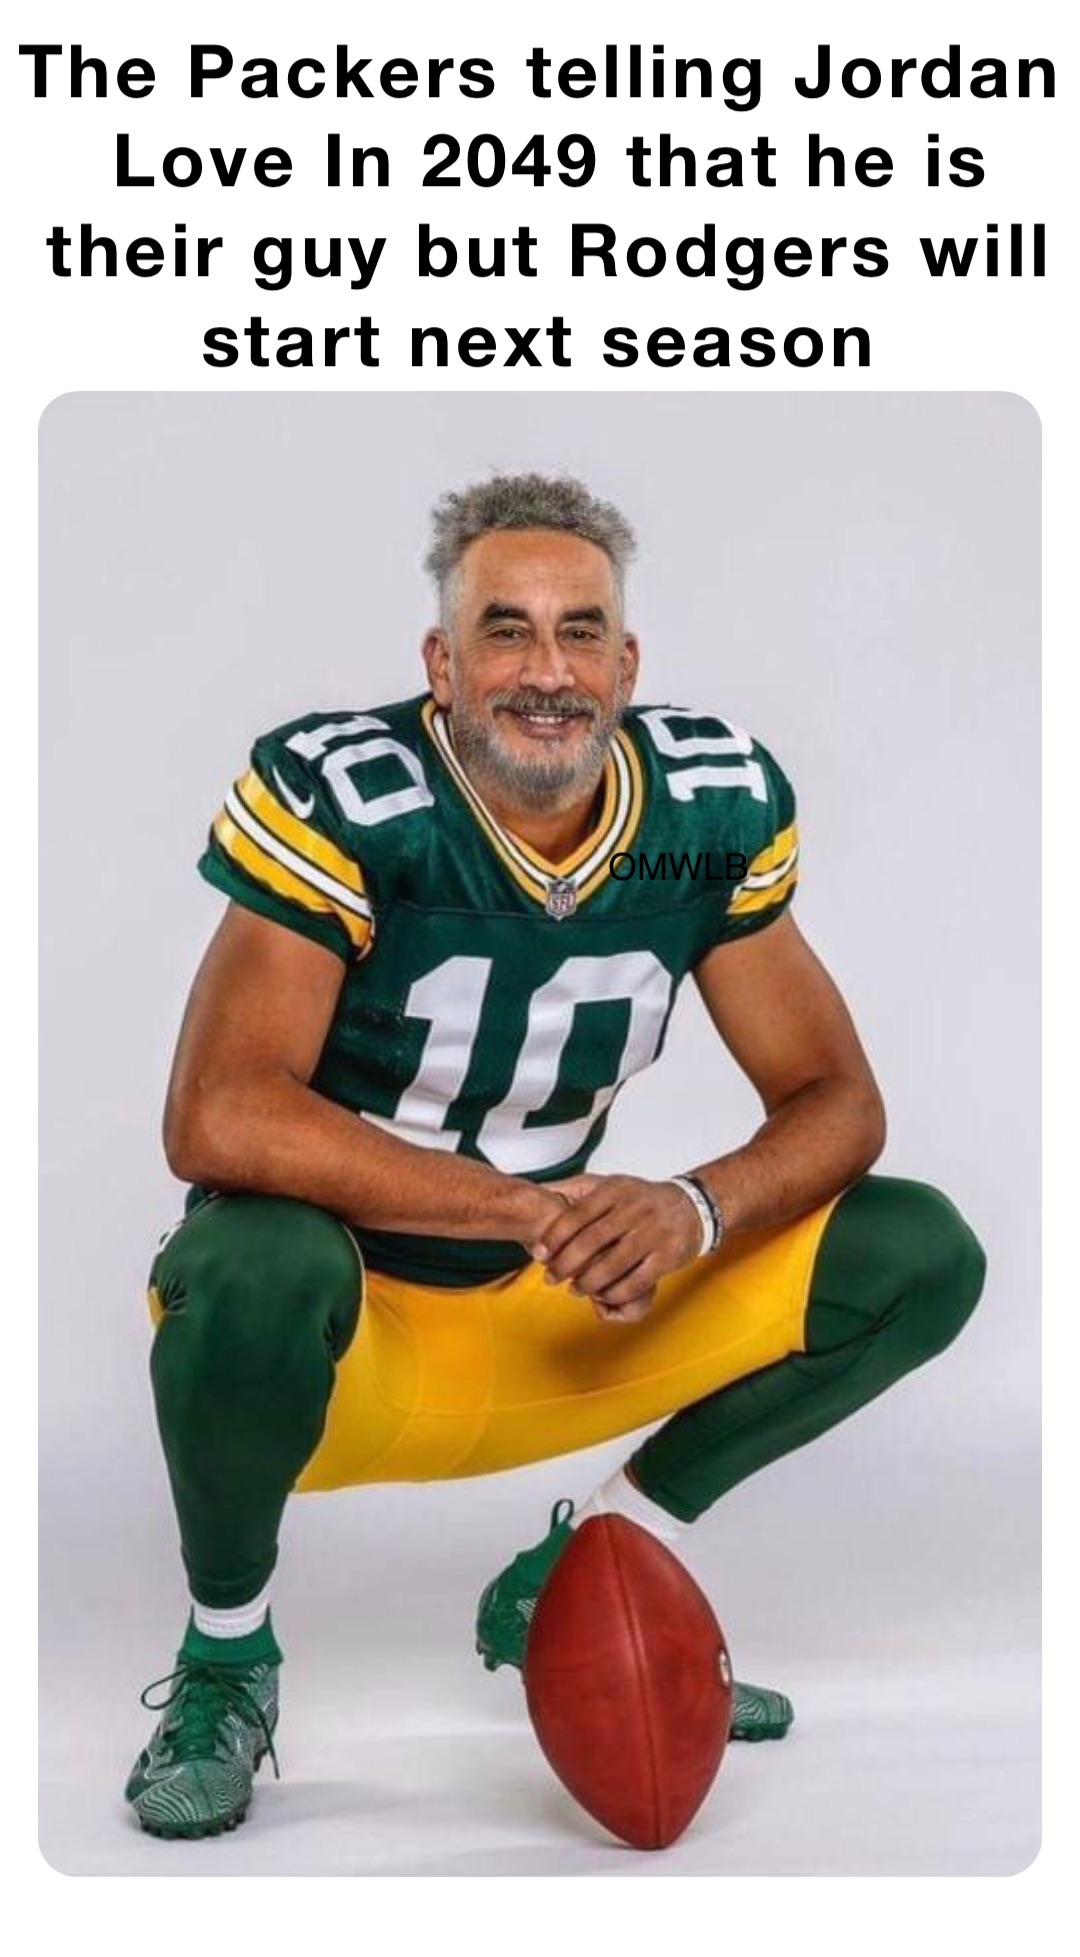 The Packers telling Jordan Love In 2049 that he is their guy but Rodgers will start next season